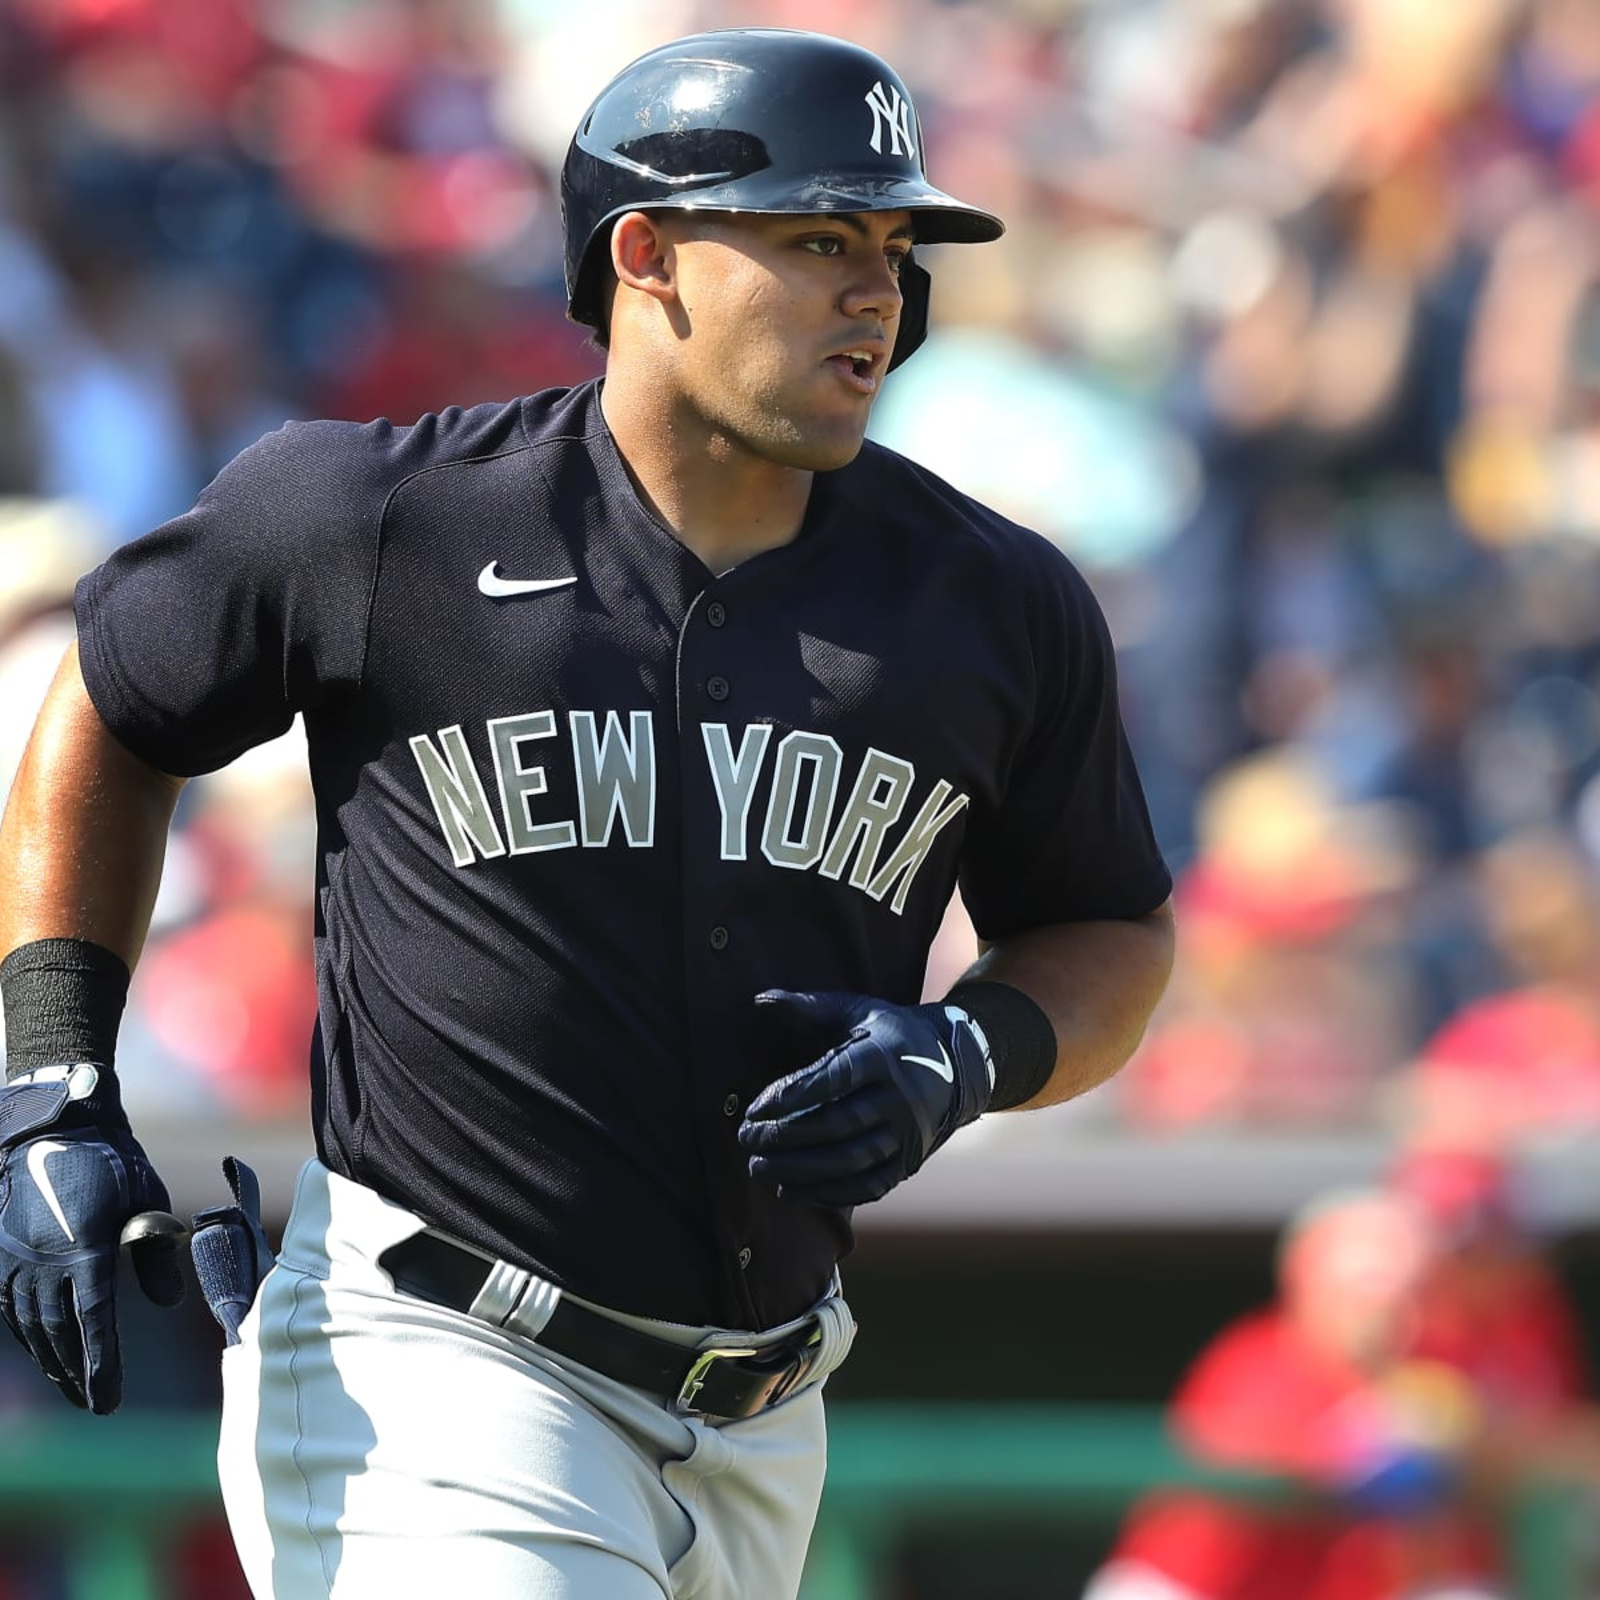 Jasson Dominguez's Presence Gives The Yankees Intrigue For September.